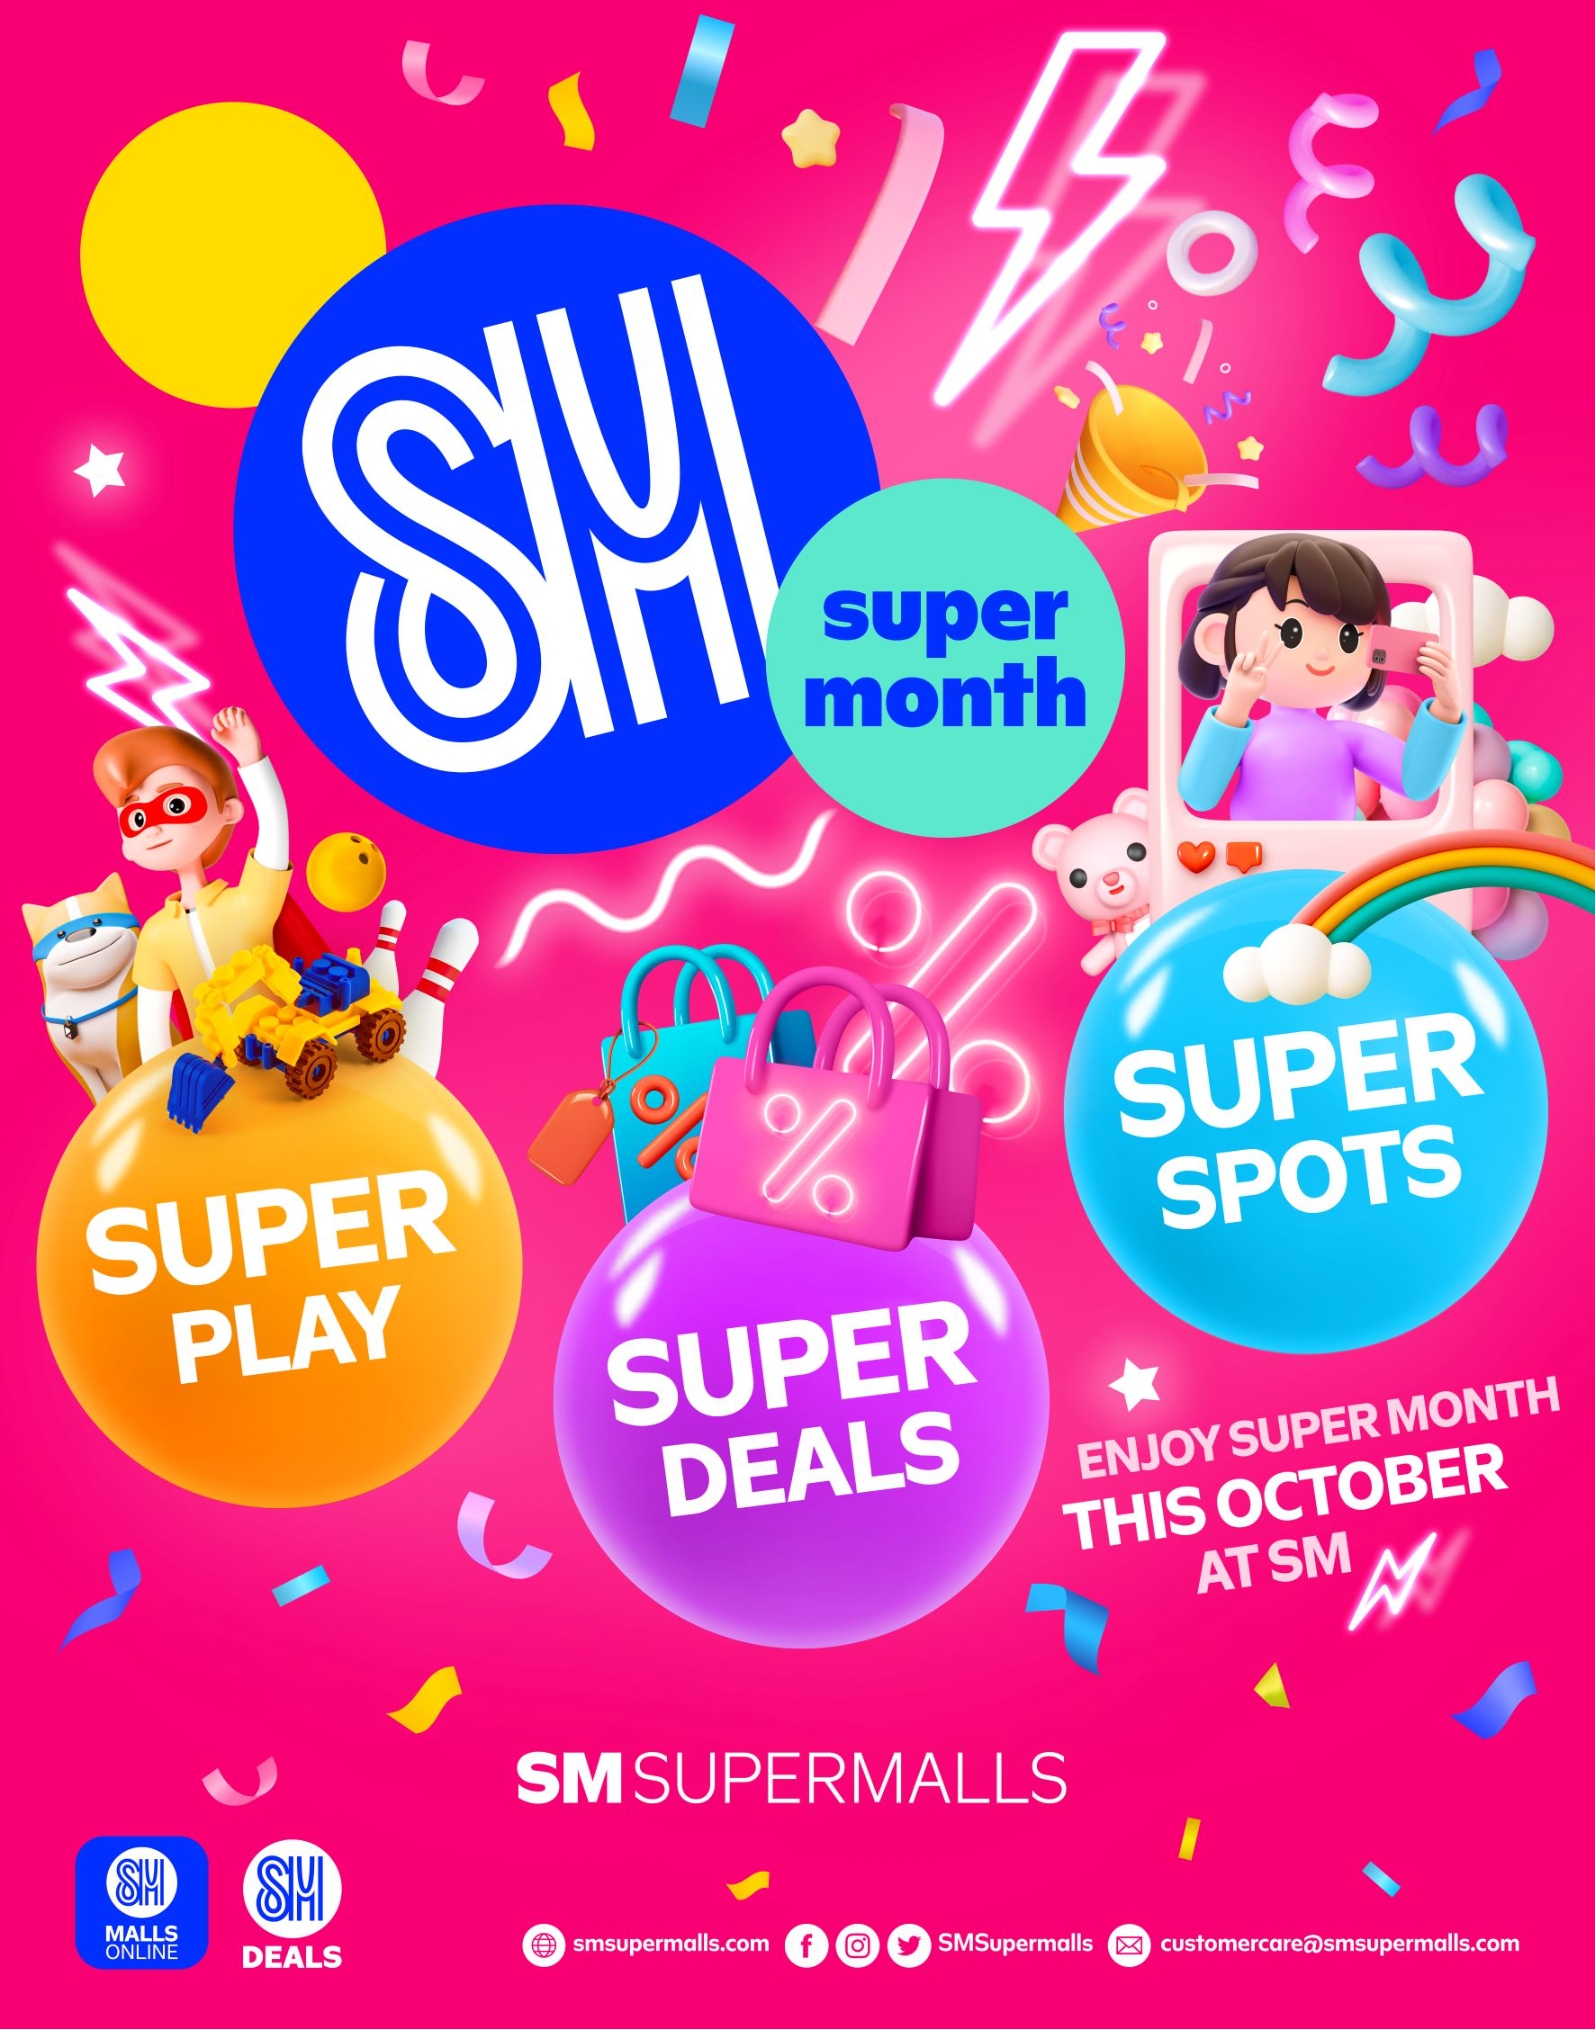 It’s Super Month at SM!